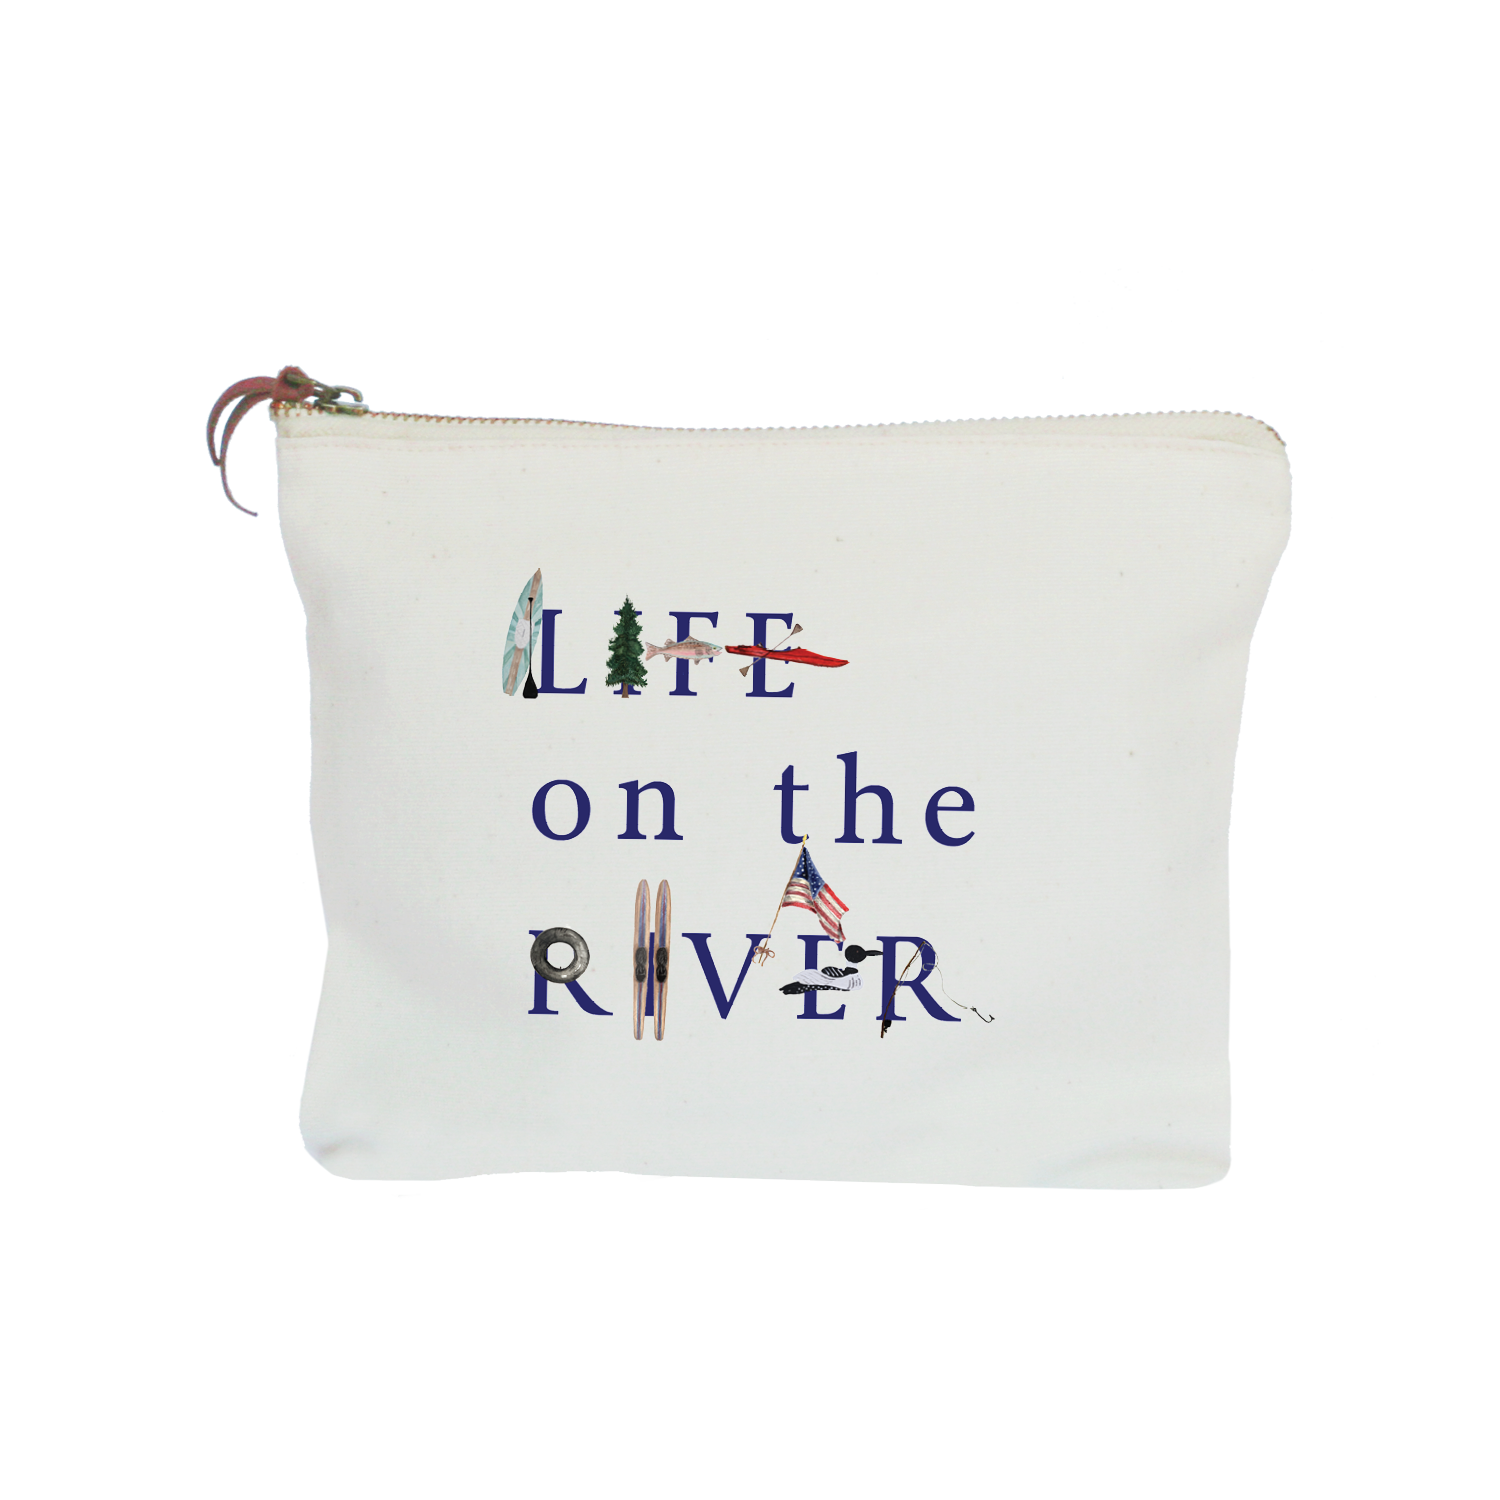 life on the river zipper pouch